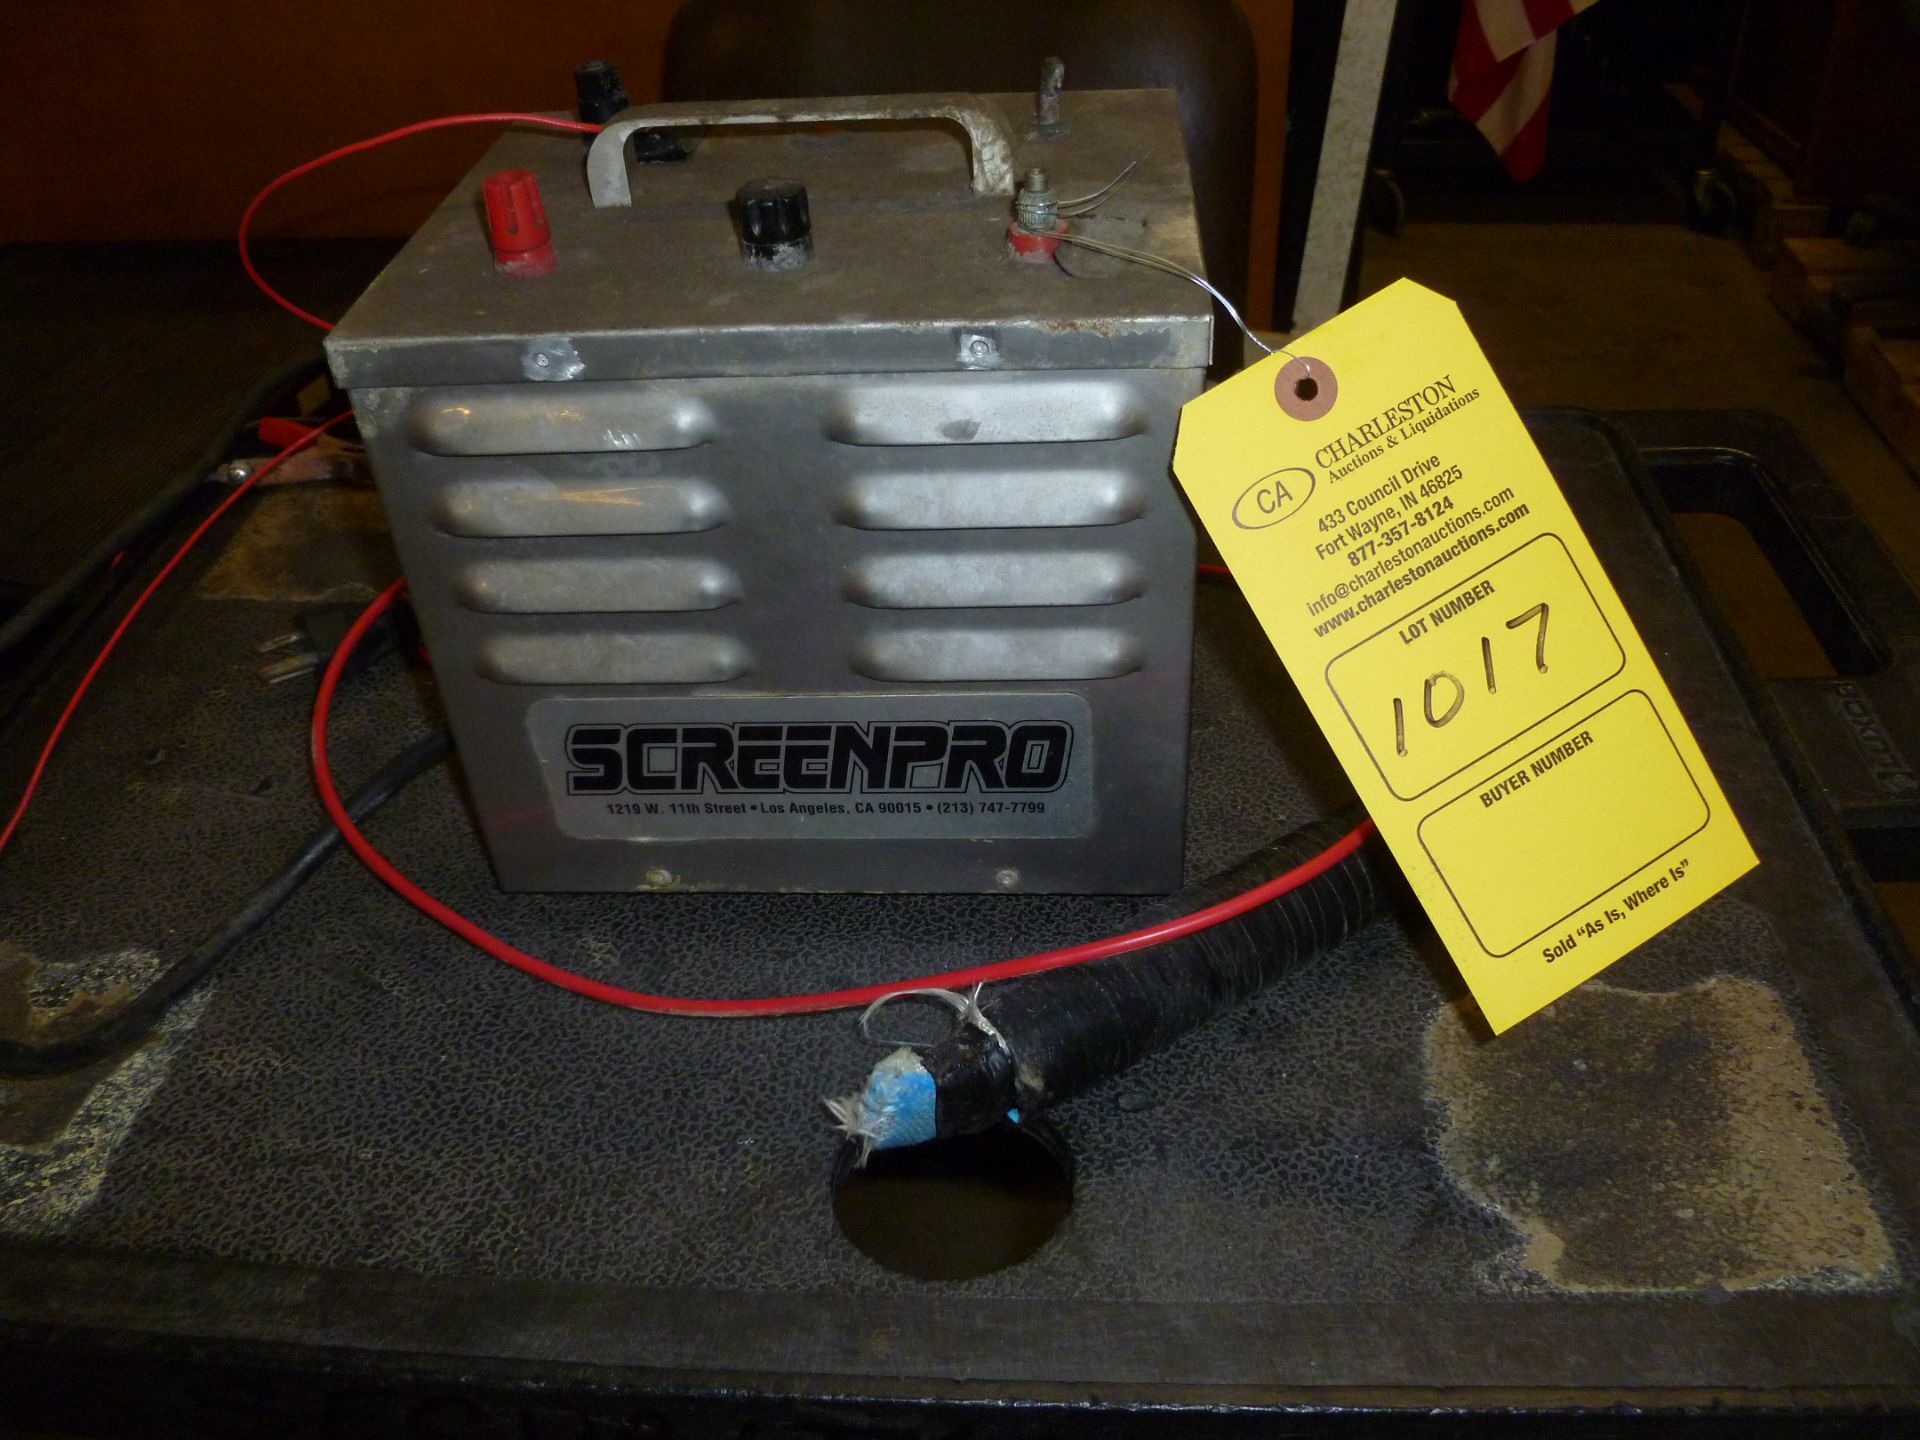 SCREENPRO HEAT (LOCATED AT 6901 ARDMORE AVE. FORT WAYNE, IN 46809)